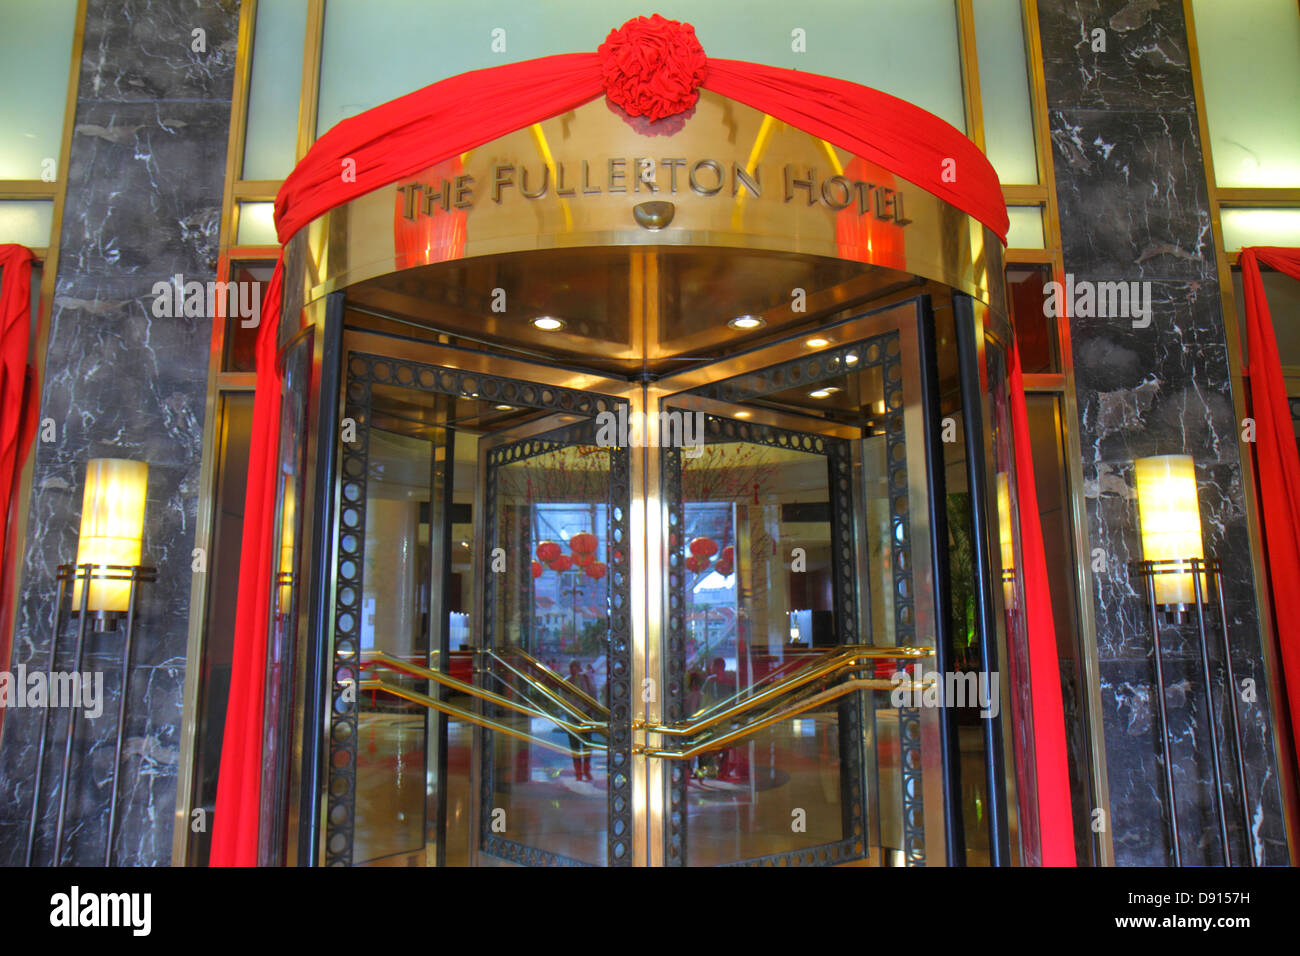 Singapore Singapore River,Boat Quay,The Fullerton,hotel,front,entrance,decorated,Chinese New Year,revolving door,Sing130201164 Stock Photo